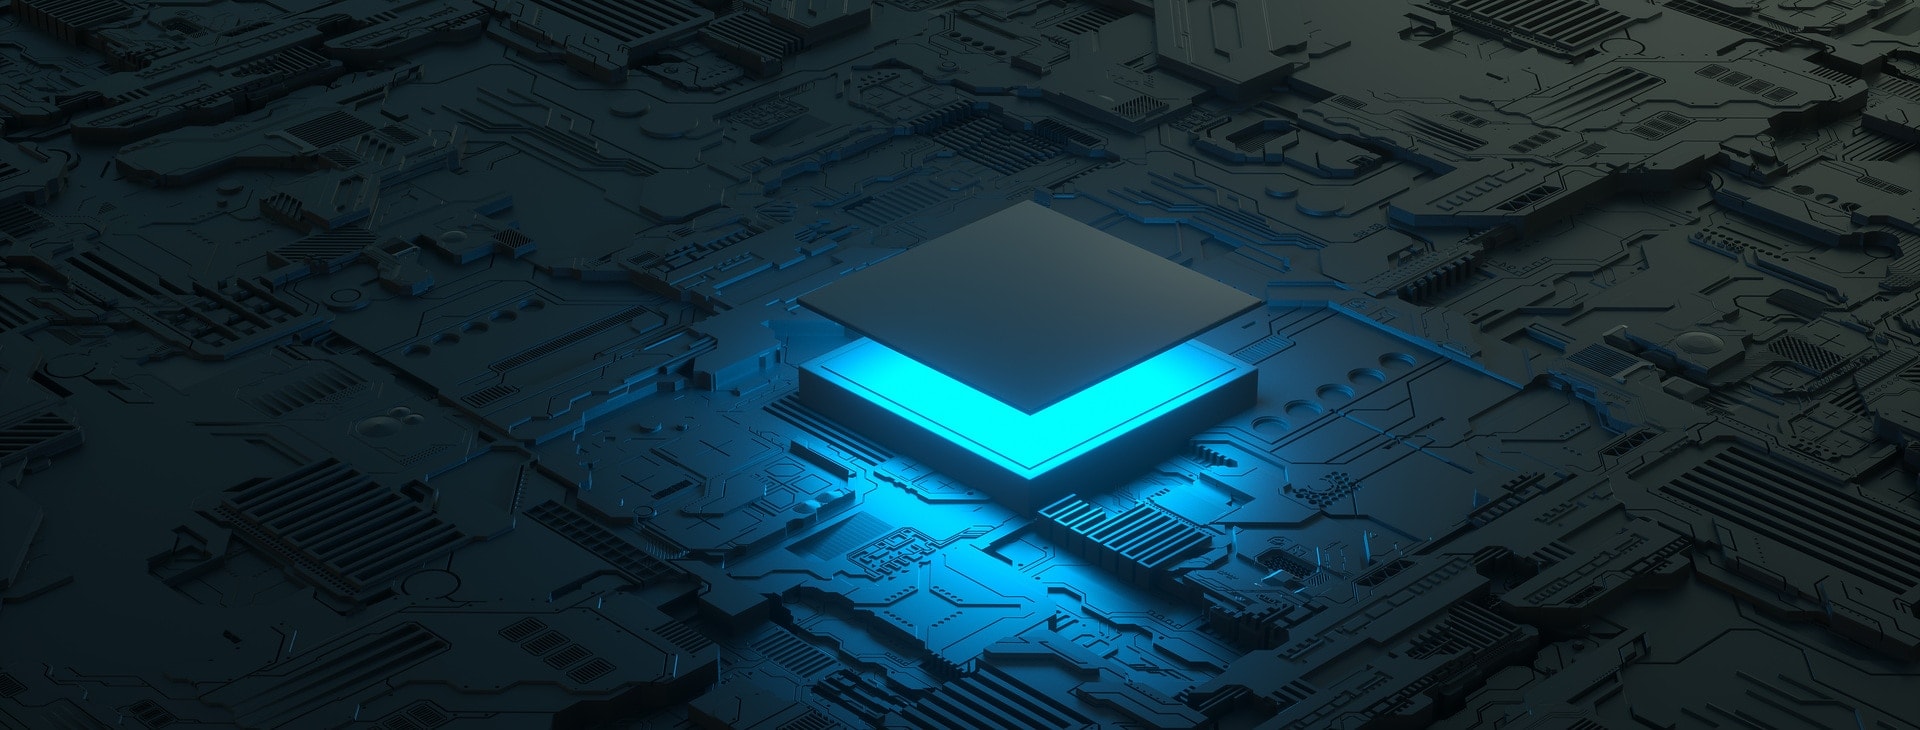 CPU chip on Motherboard - abstract 3D render of a processor computer chip with blue light